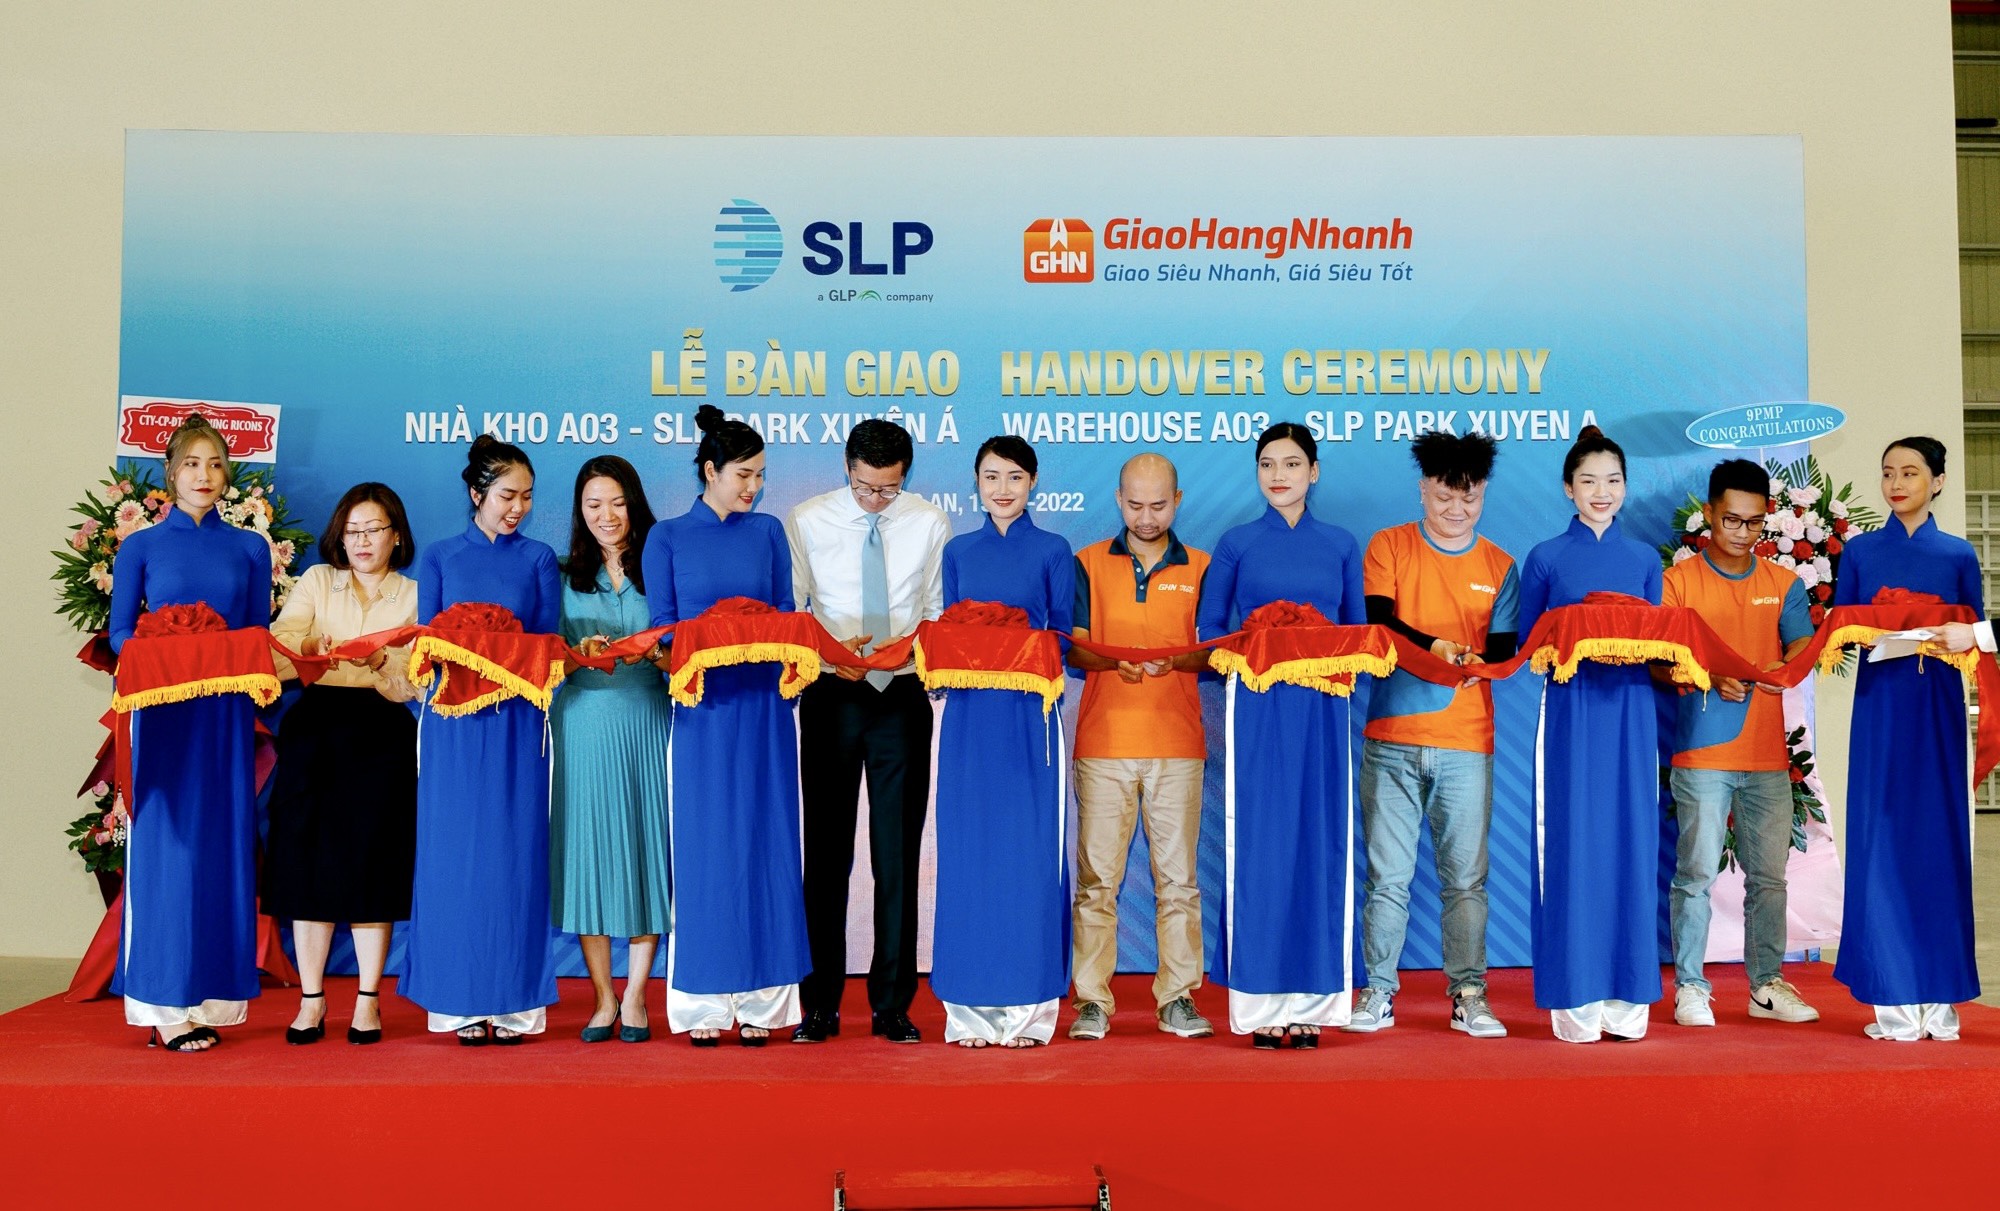 SLP Delivers 20,000 SQM Park Xuyen A to Giao Hang Nhanh (GHN)